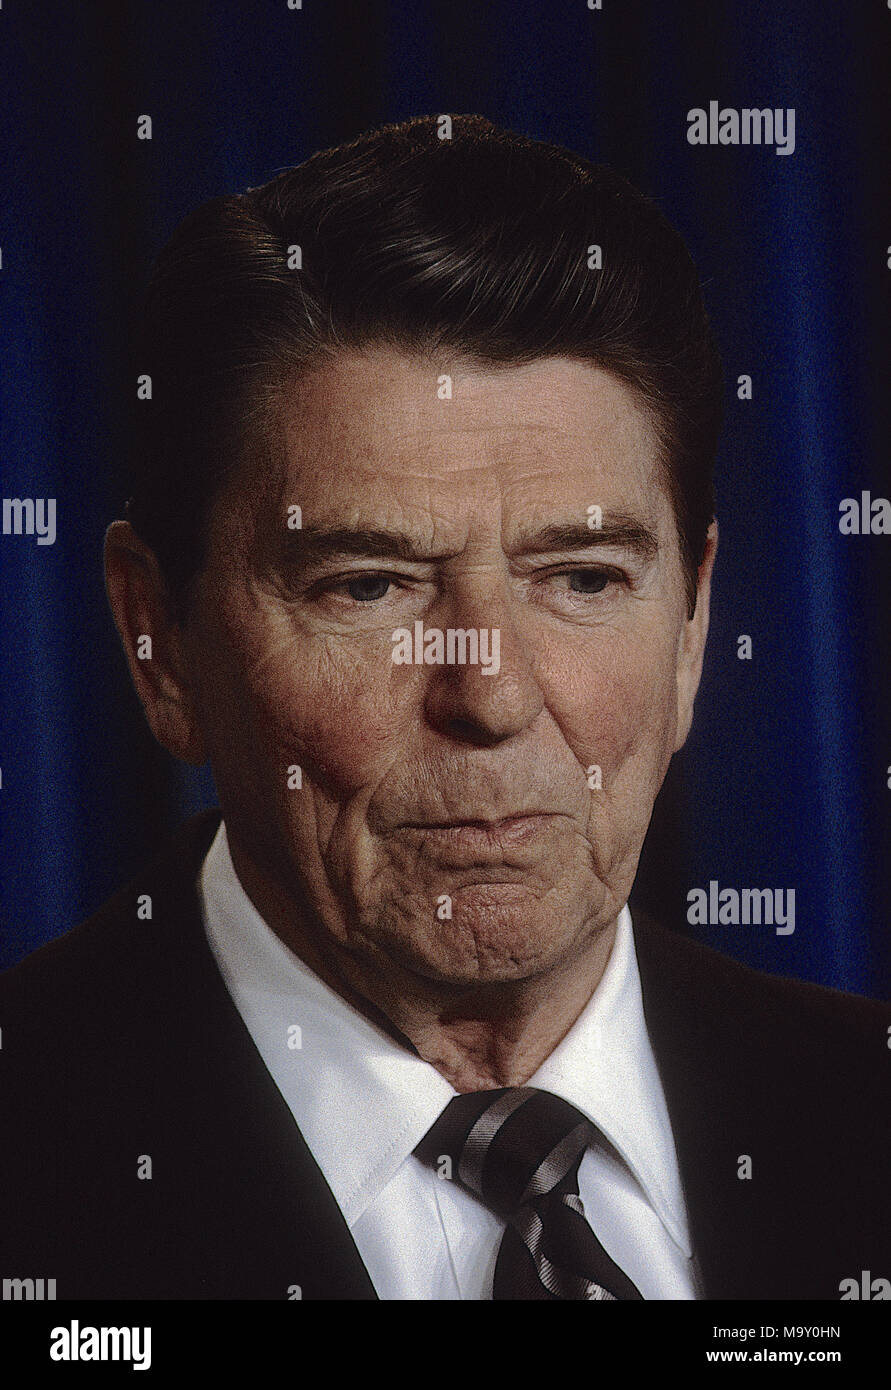 Washington, DC., USA, May 14, 1984 President Ronald Reagan delivers remarks during a question-and-answer session with reporters on foreign and domestic issues in the briefing room of the White House. Credit: Mark Reinstein/MediaPunch Stock Photo